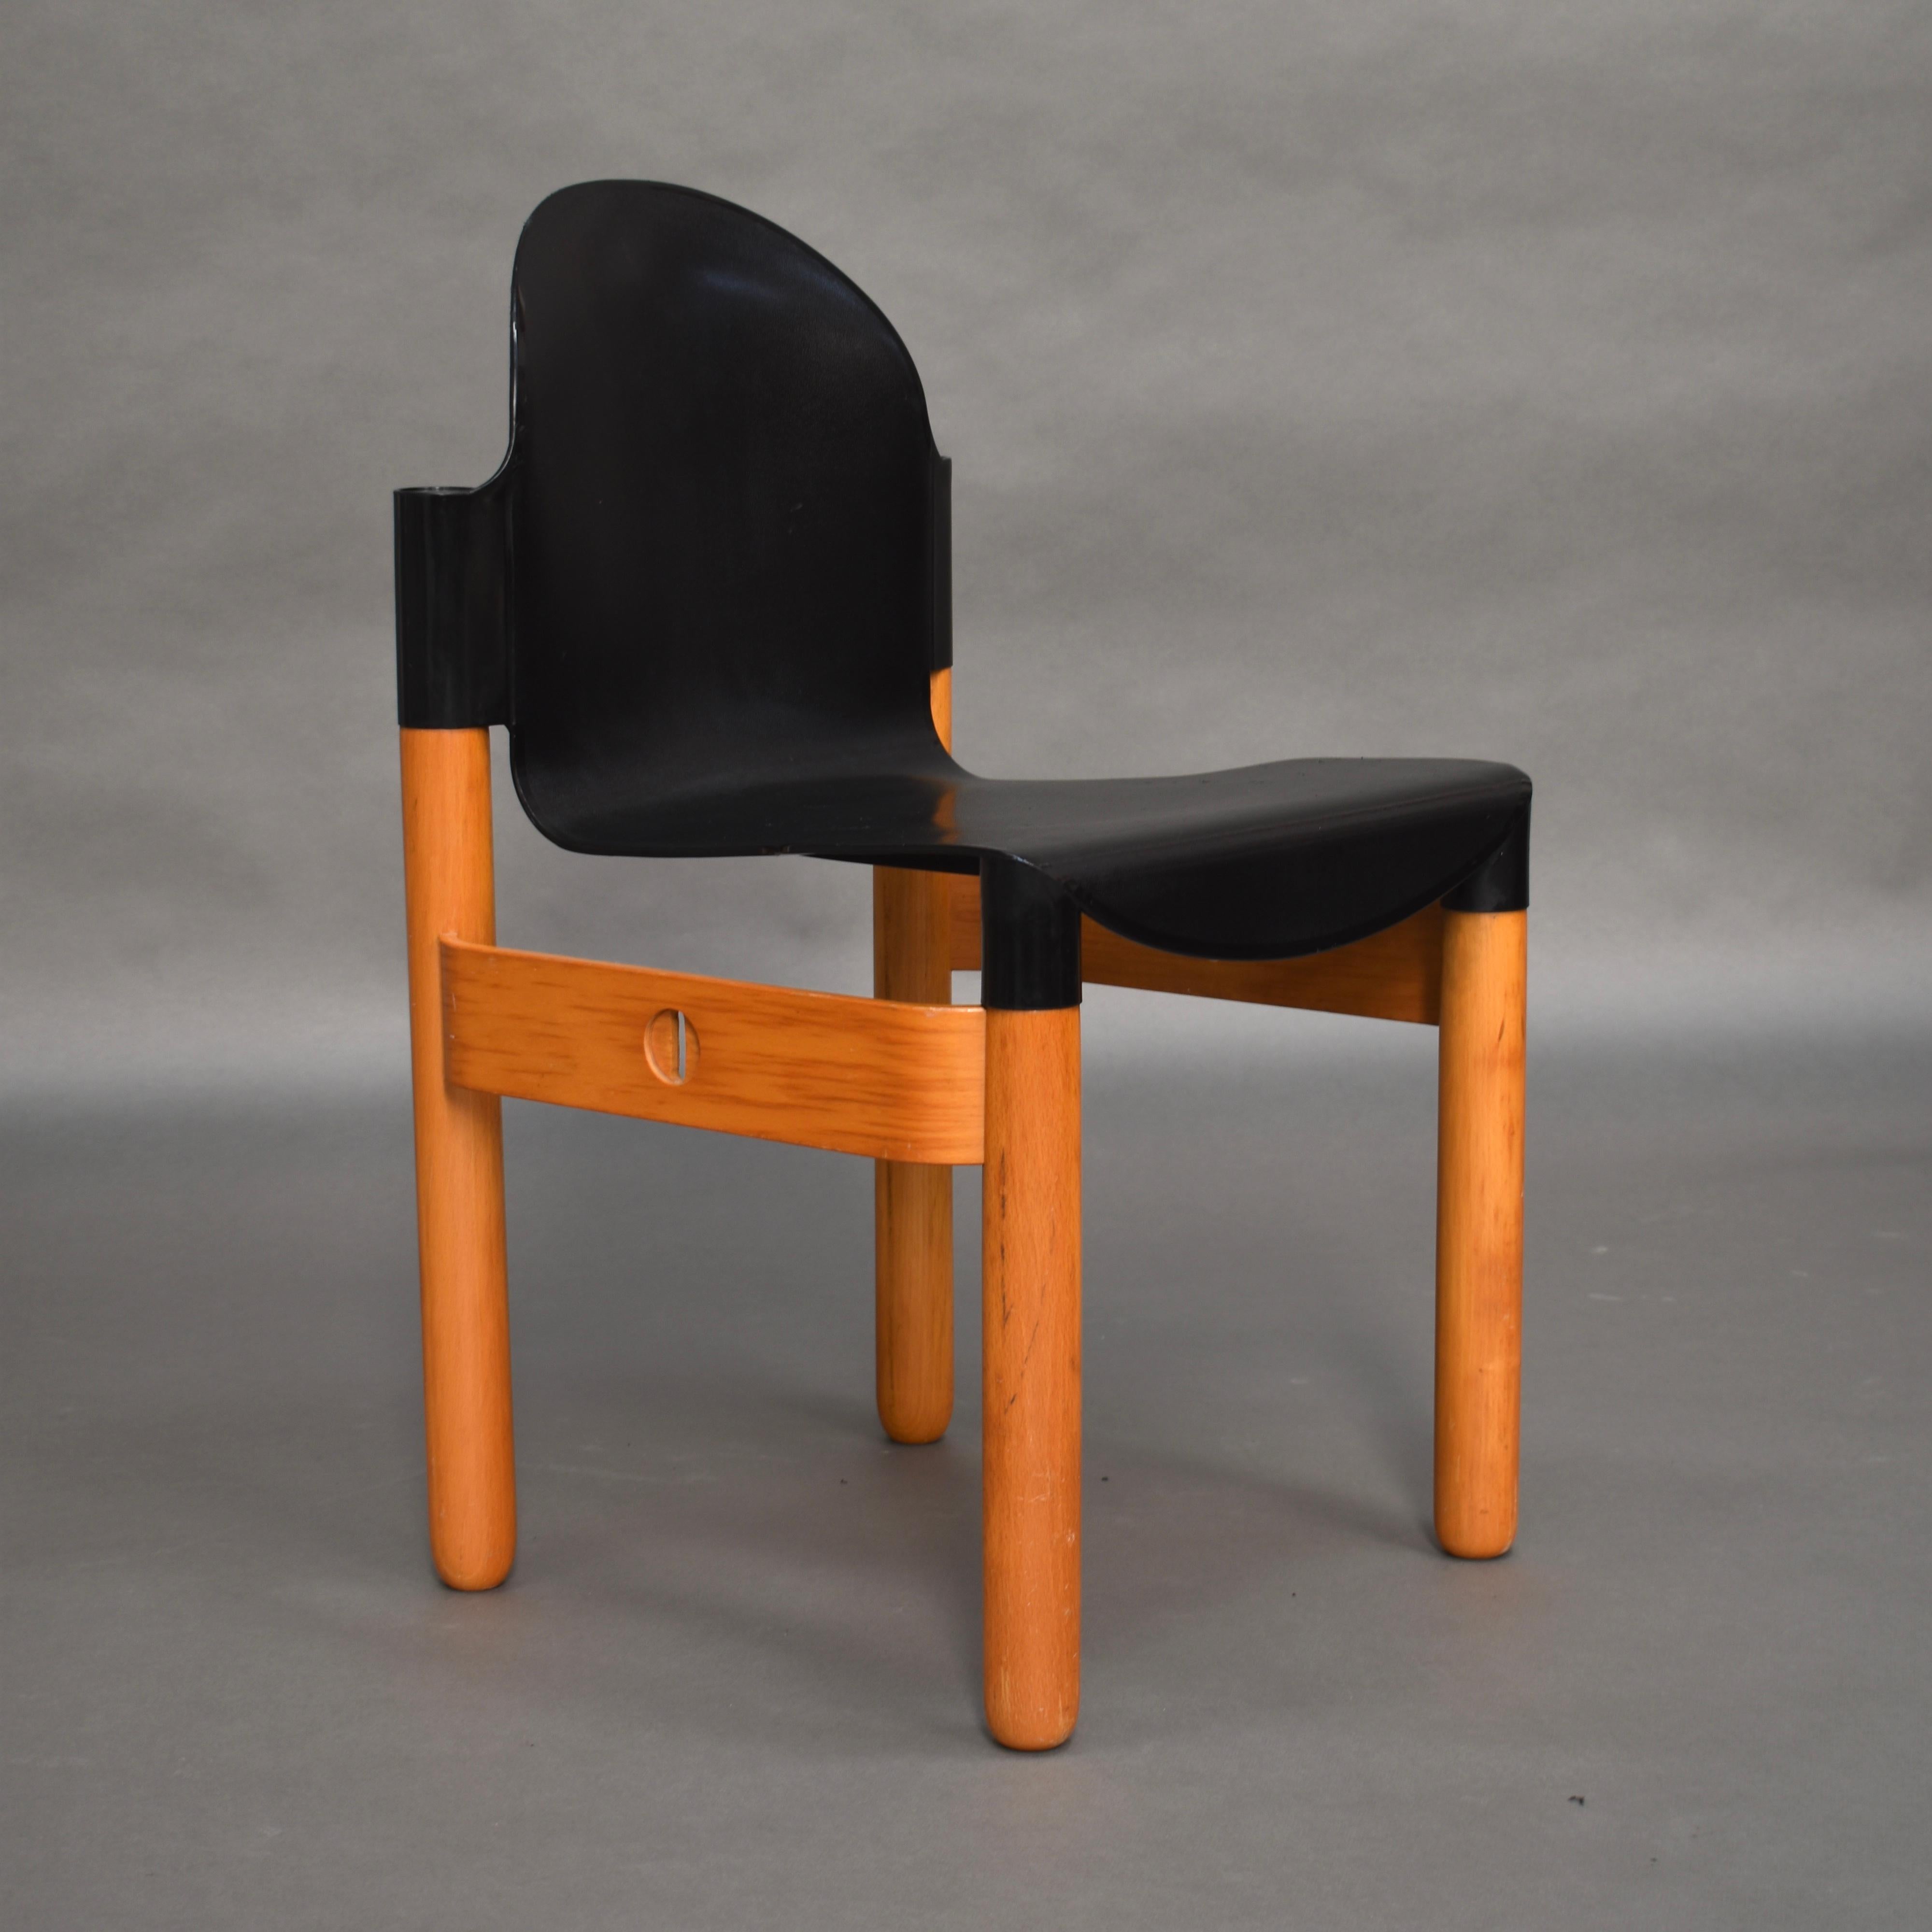 Designer: Gerd Lange

Manufacturer: THONET

Model: Flex chair

Material: Birch / Plastic

Design period: 1973

Size in cm: 49 x 49 x 79 seat height 46cm.

Condition: Good / Some scratching and staining on the seat / A damage on the side